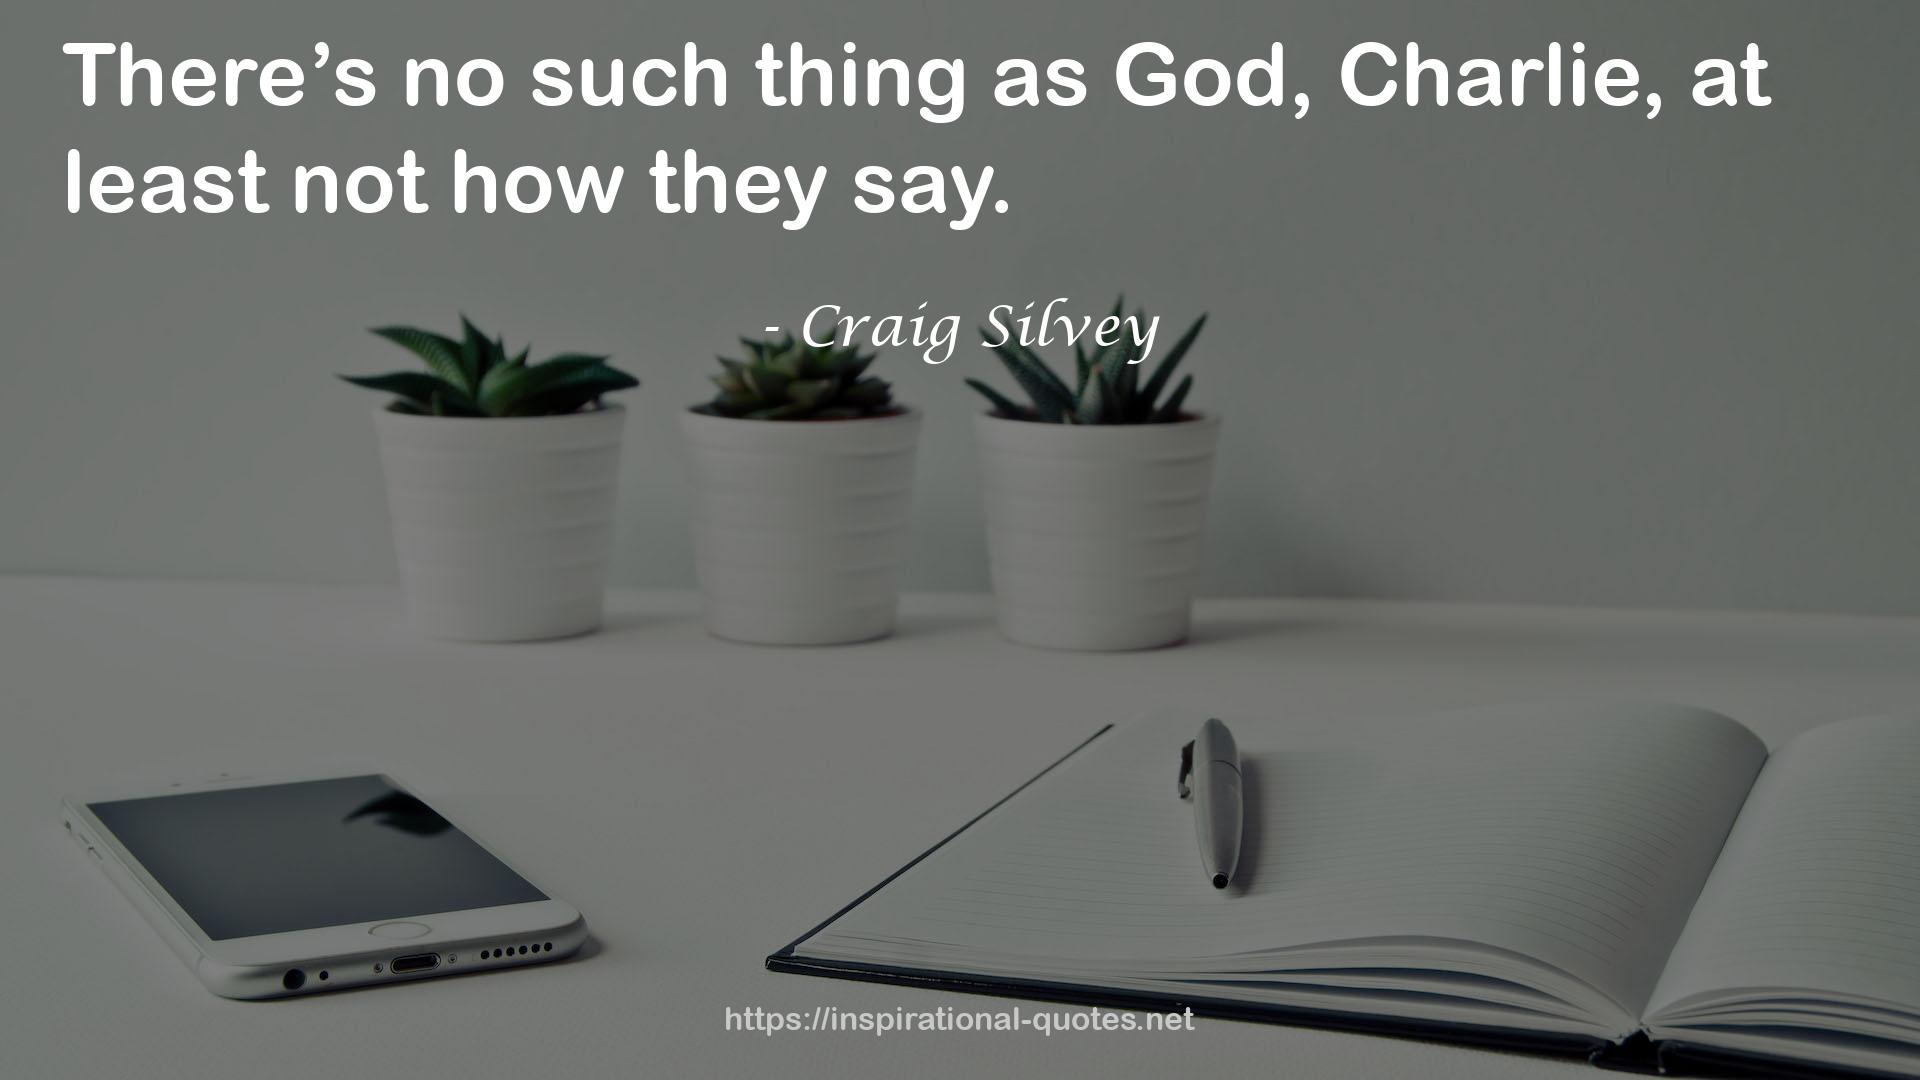 Craig Silvey QUOTES